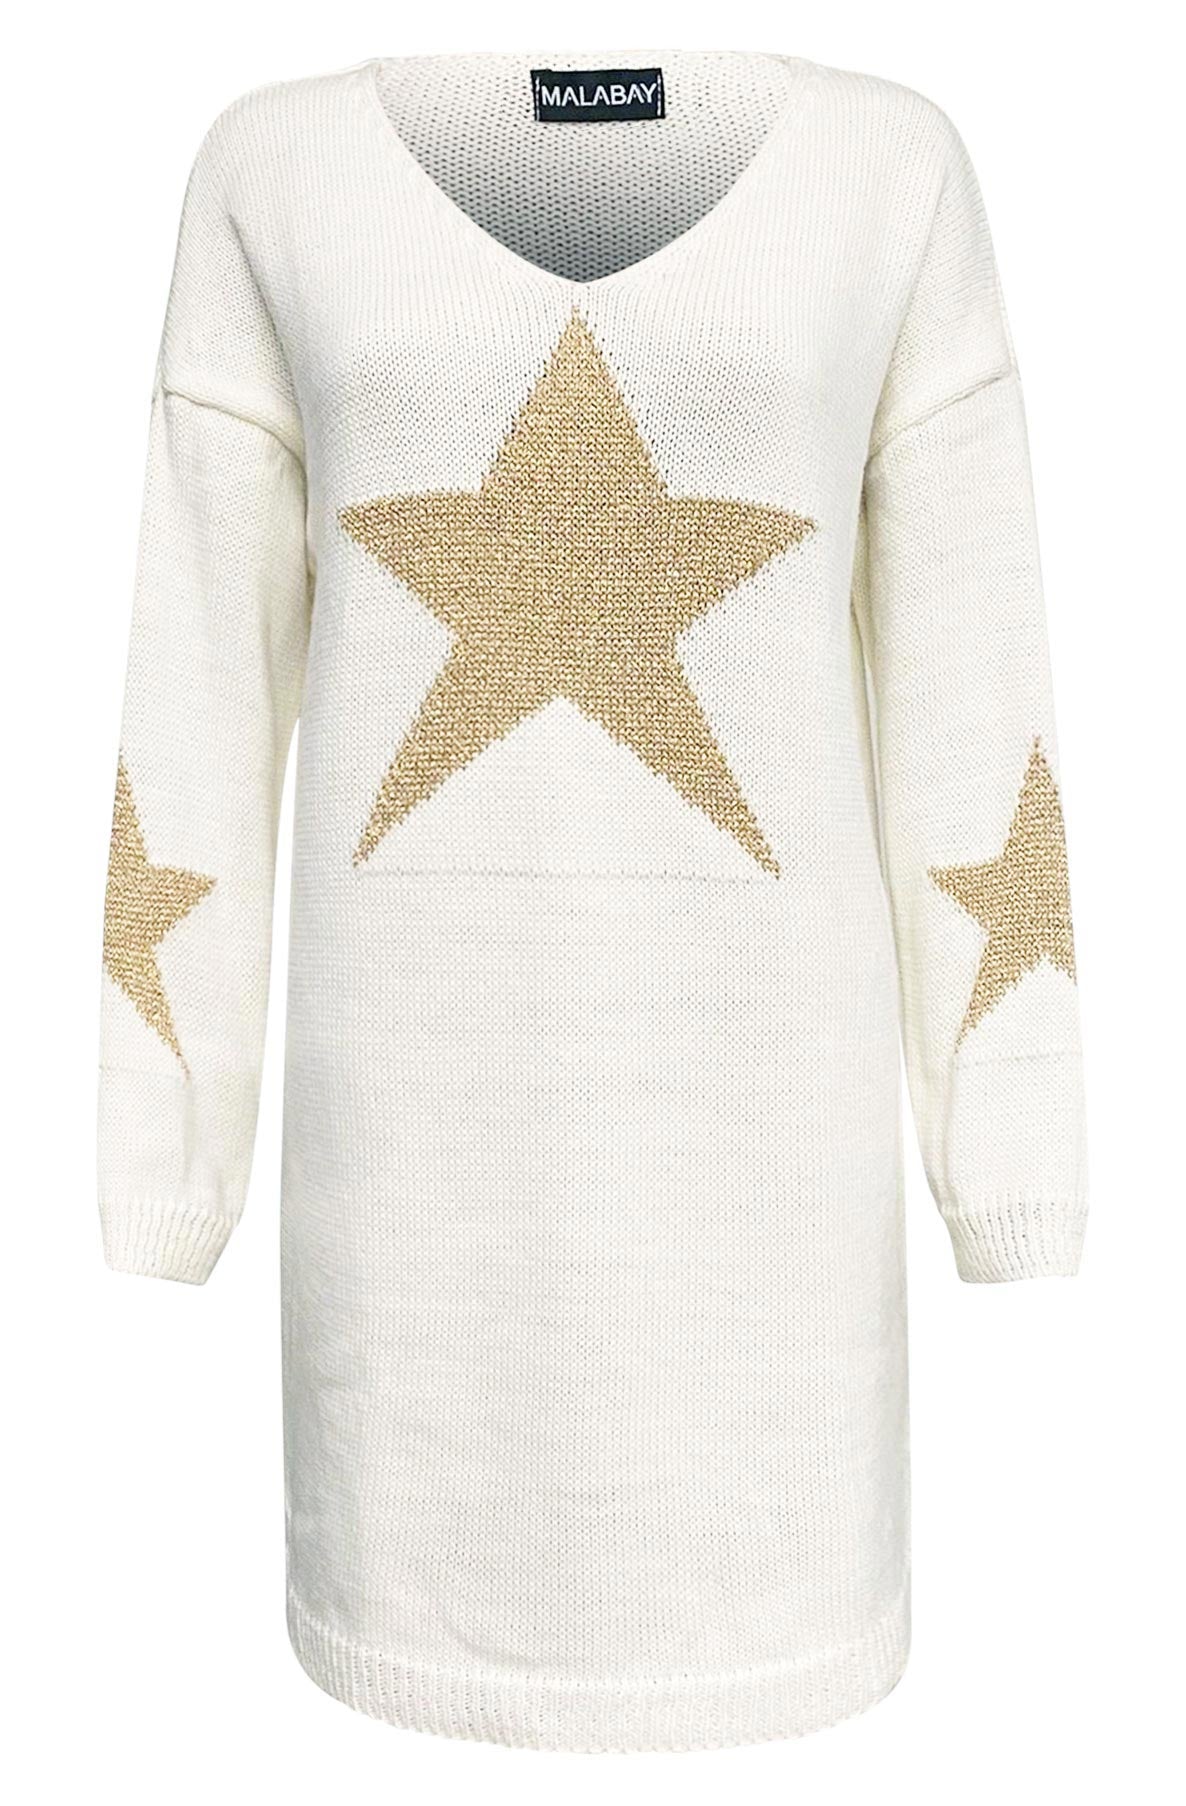 Bethany 'STAR' Shimmer Knitted Jumper Tunic Top-Ivory